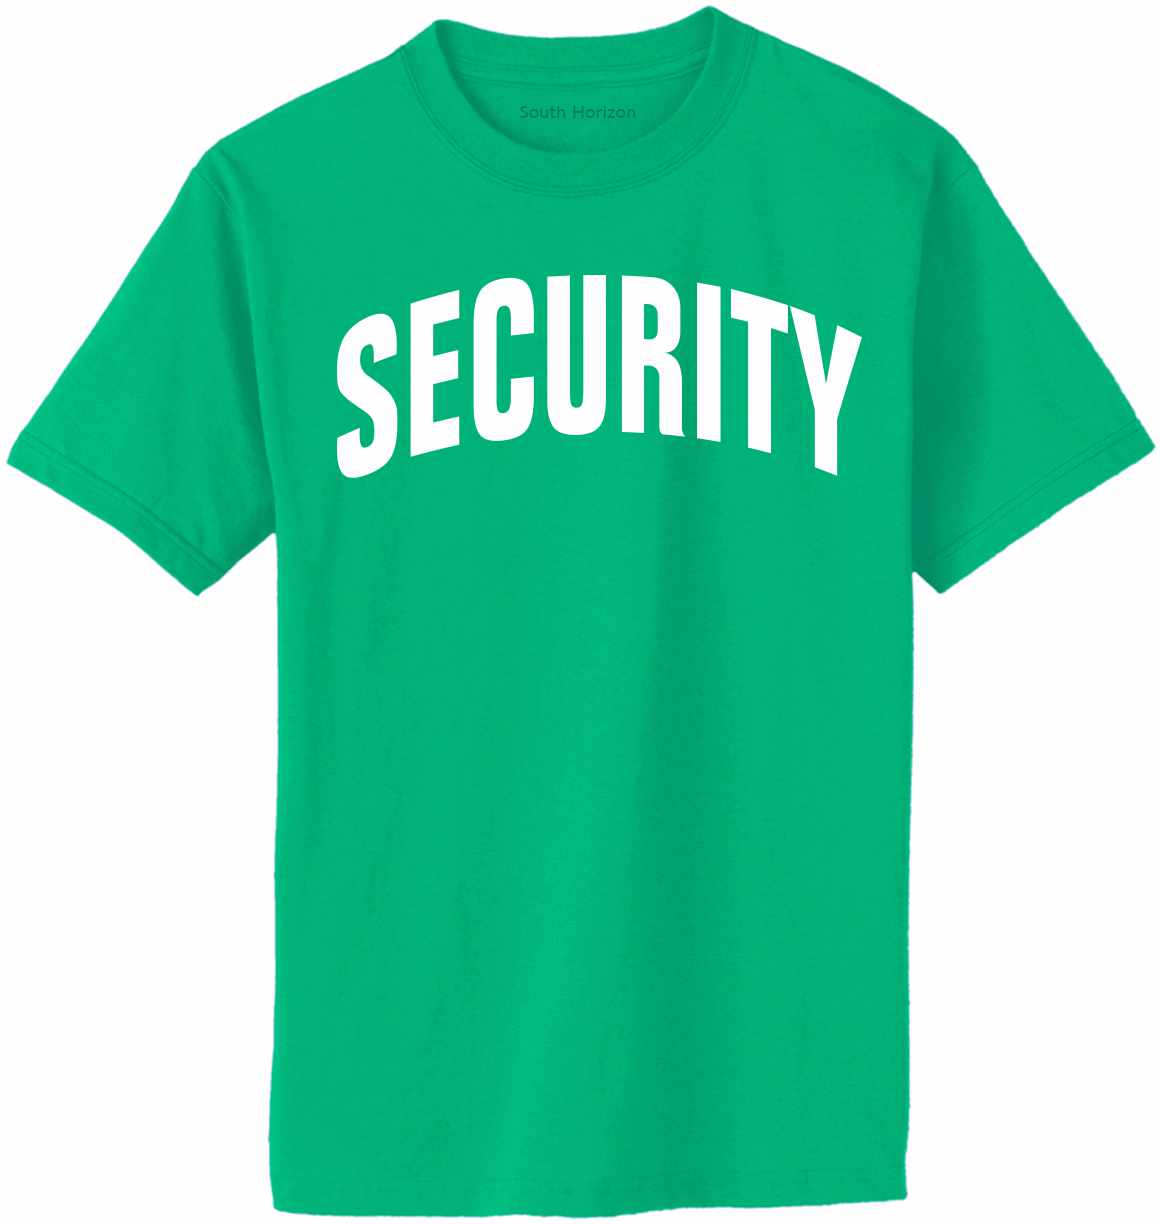 SECURITY on Adult T-Shirt (#36-1)